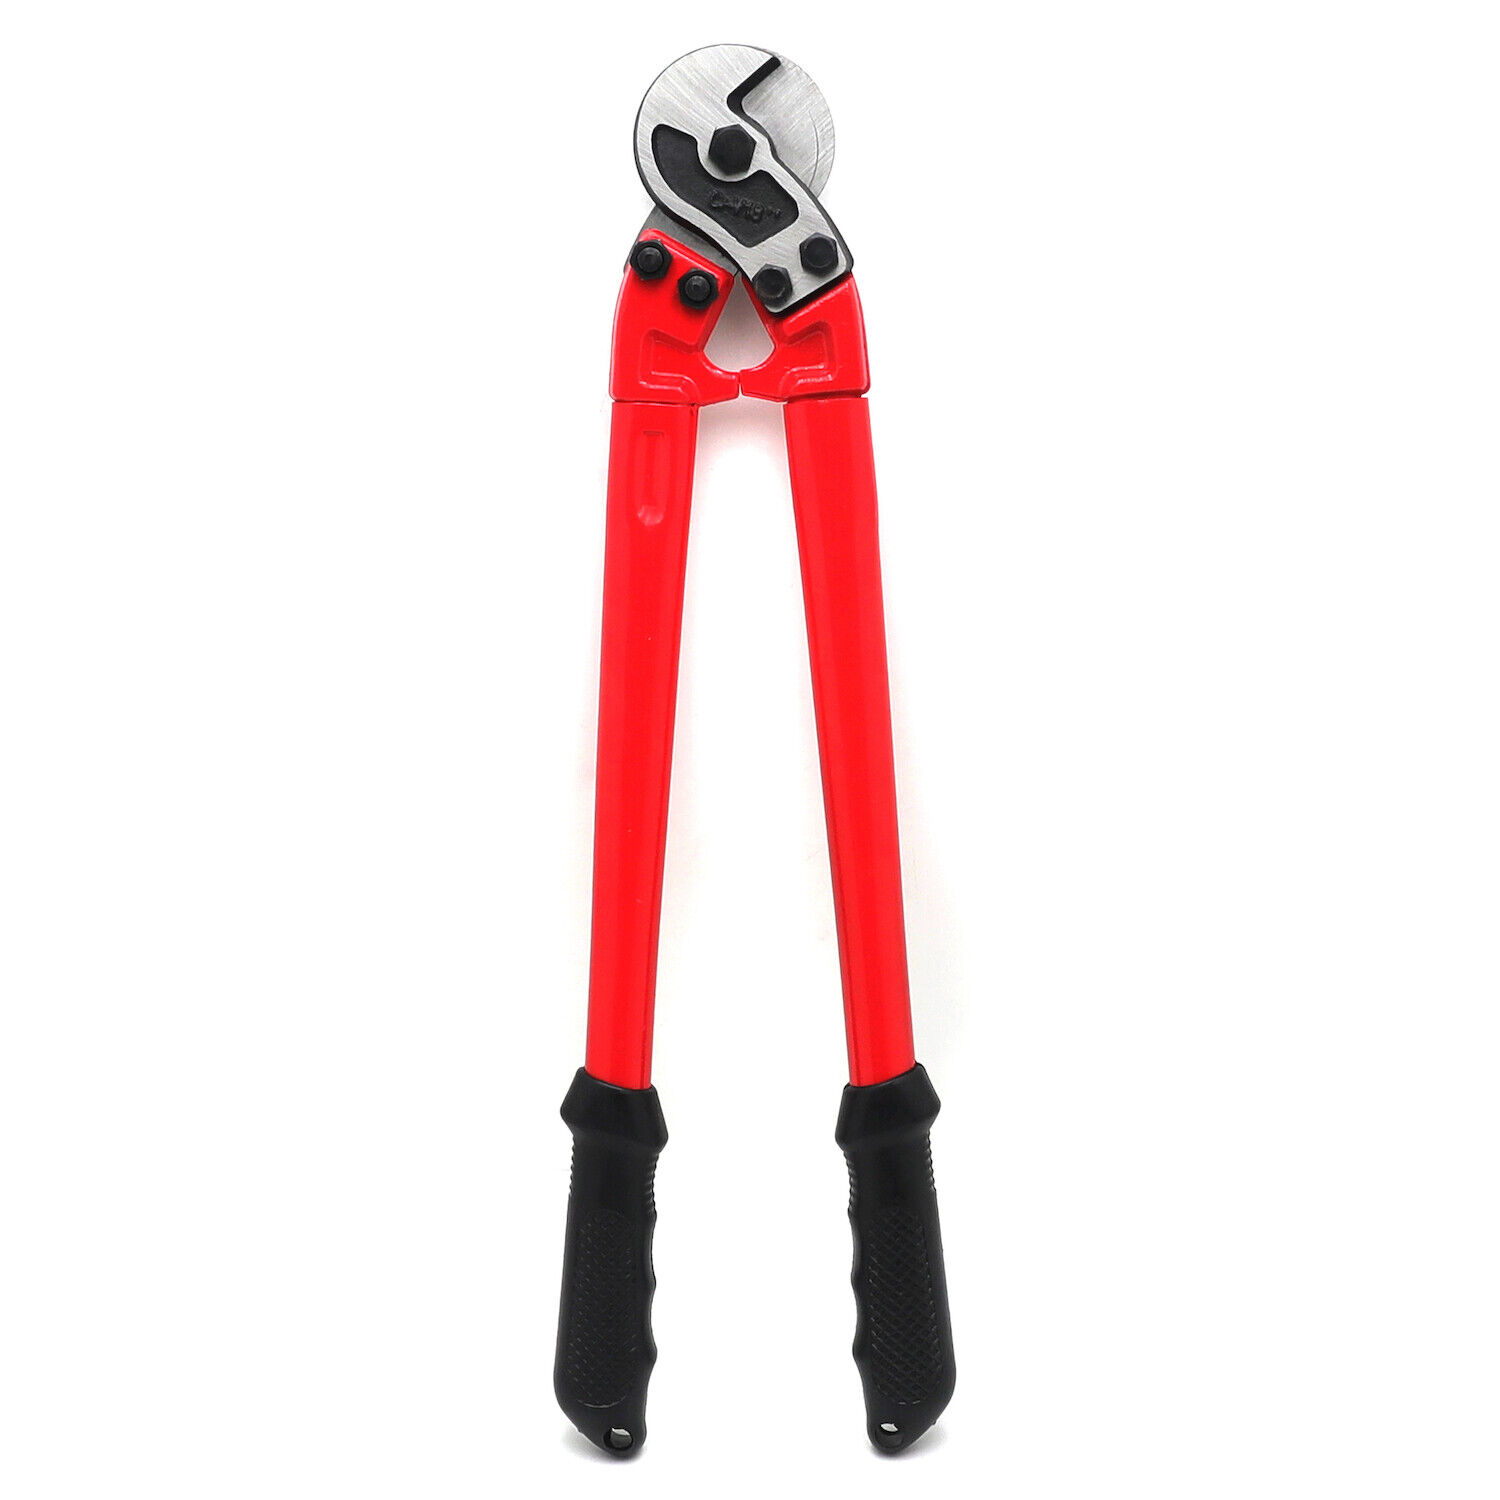 18" Hardened Cable Cutter- Hard Soft Steel Cable Wire Seals Aircraft Bicycle